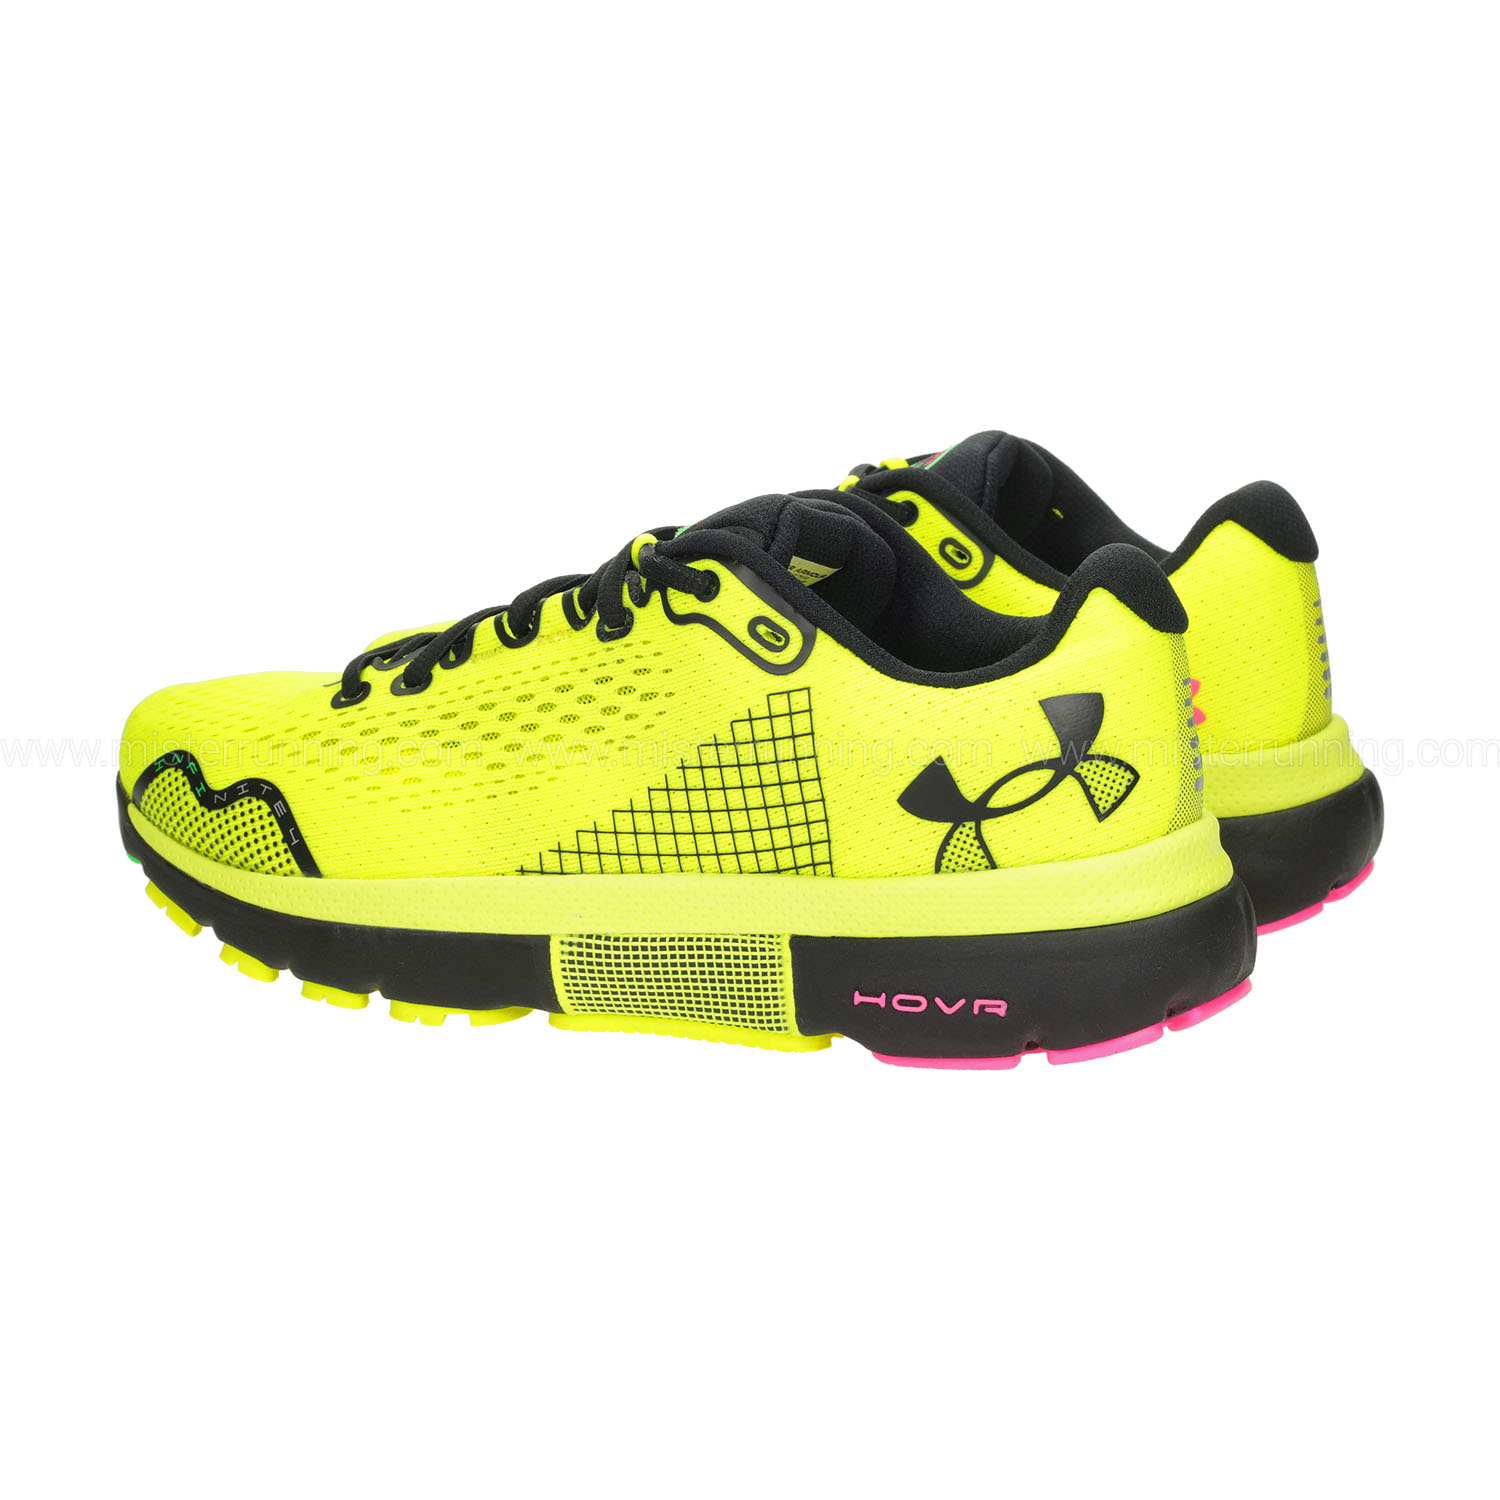 Under Armour HOVR Infinite 4 - Yellow Ray/Black